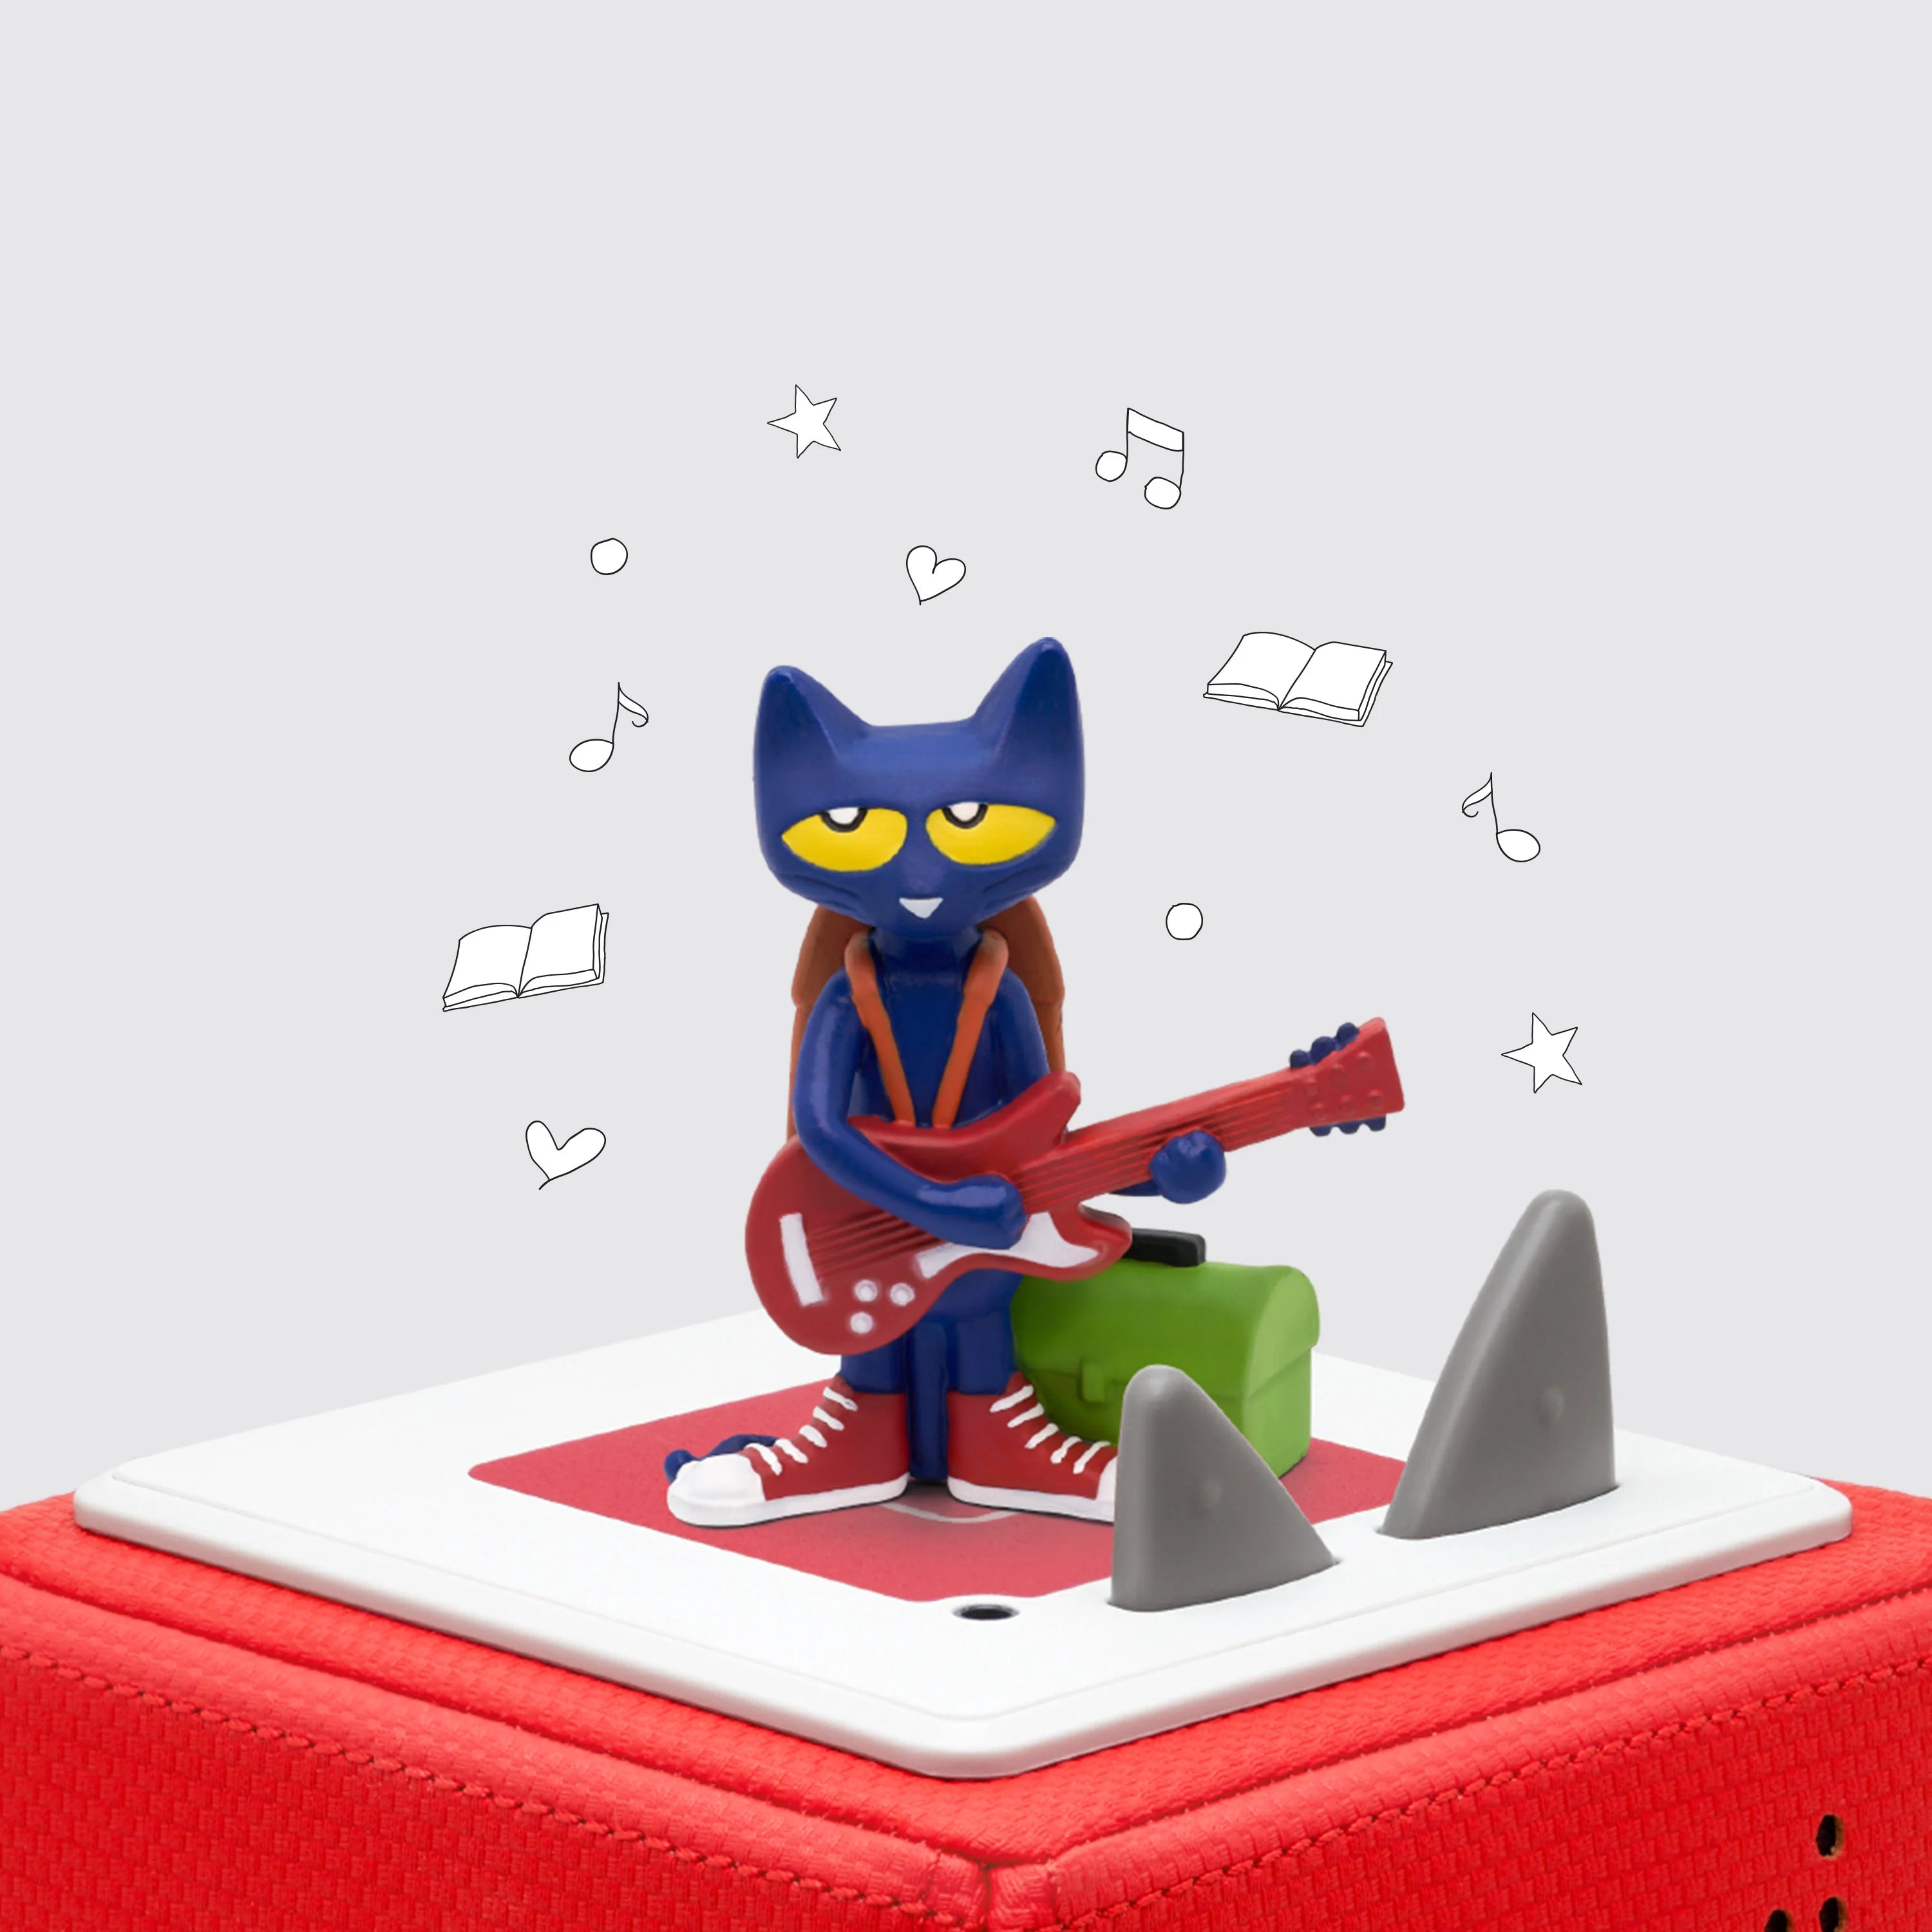 Pete The Cat 2 by Tonies #10001870